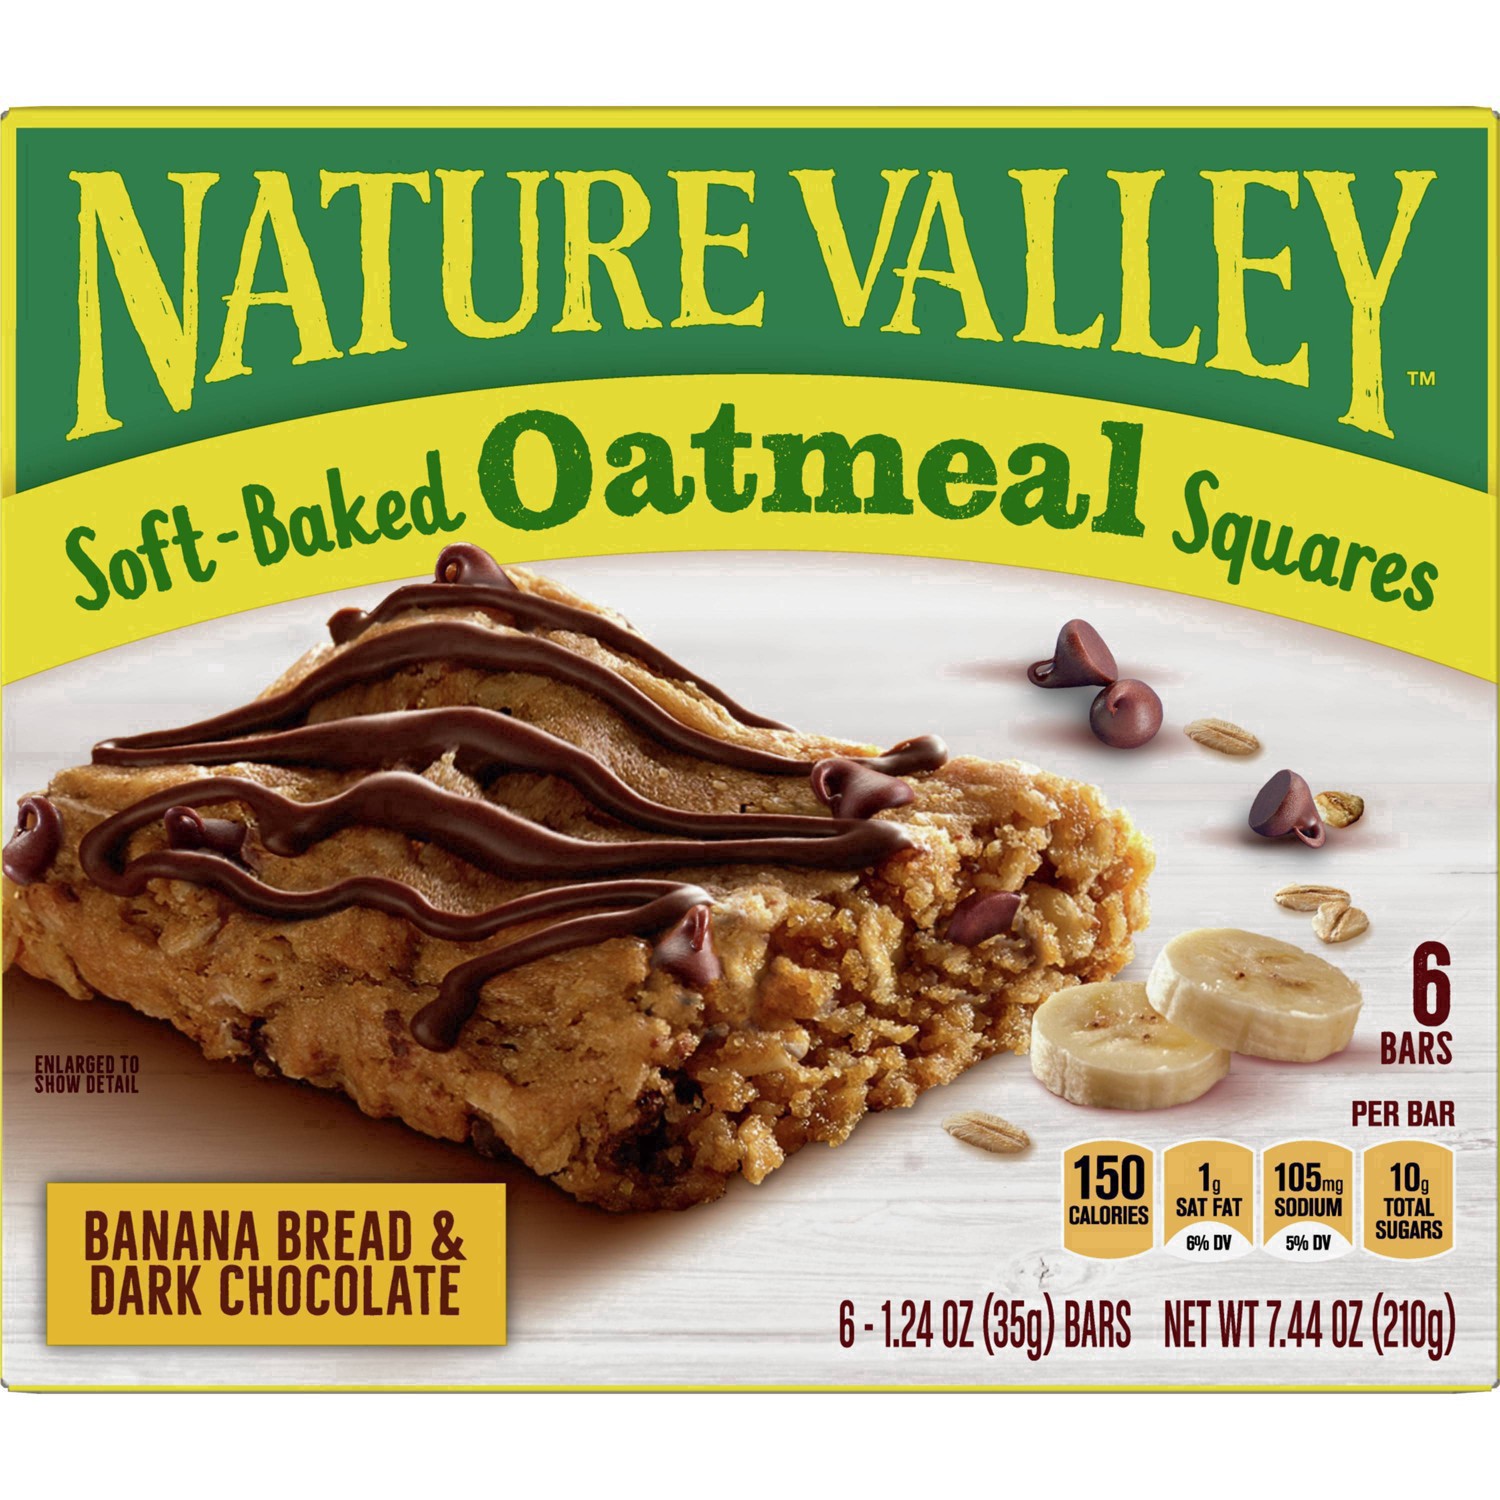 slide 82 of 101, Nature Valley Soft-Baked Oatmeal Squares, Banana Bread & Dark Chocolate, 6 ct, 6 ct